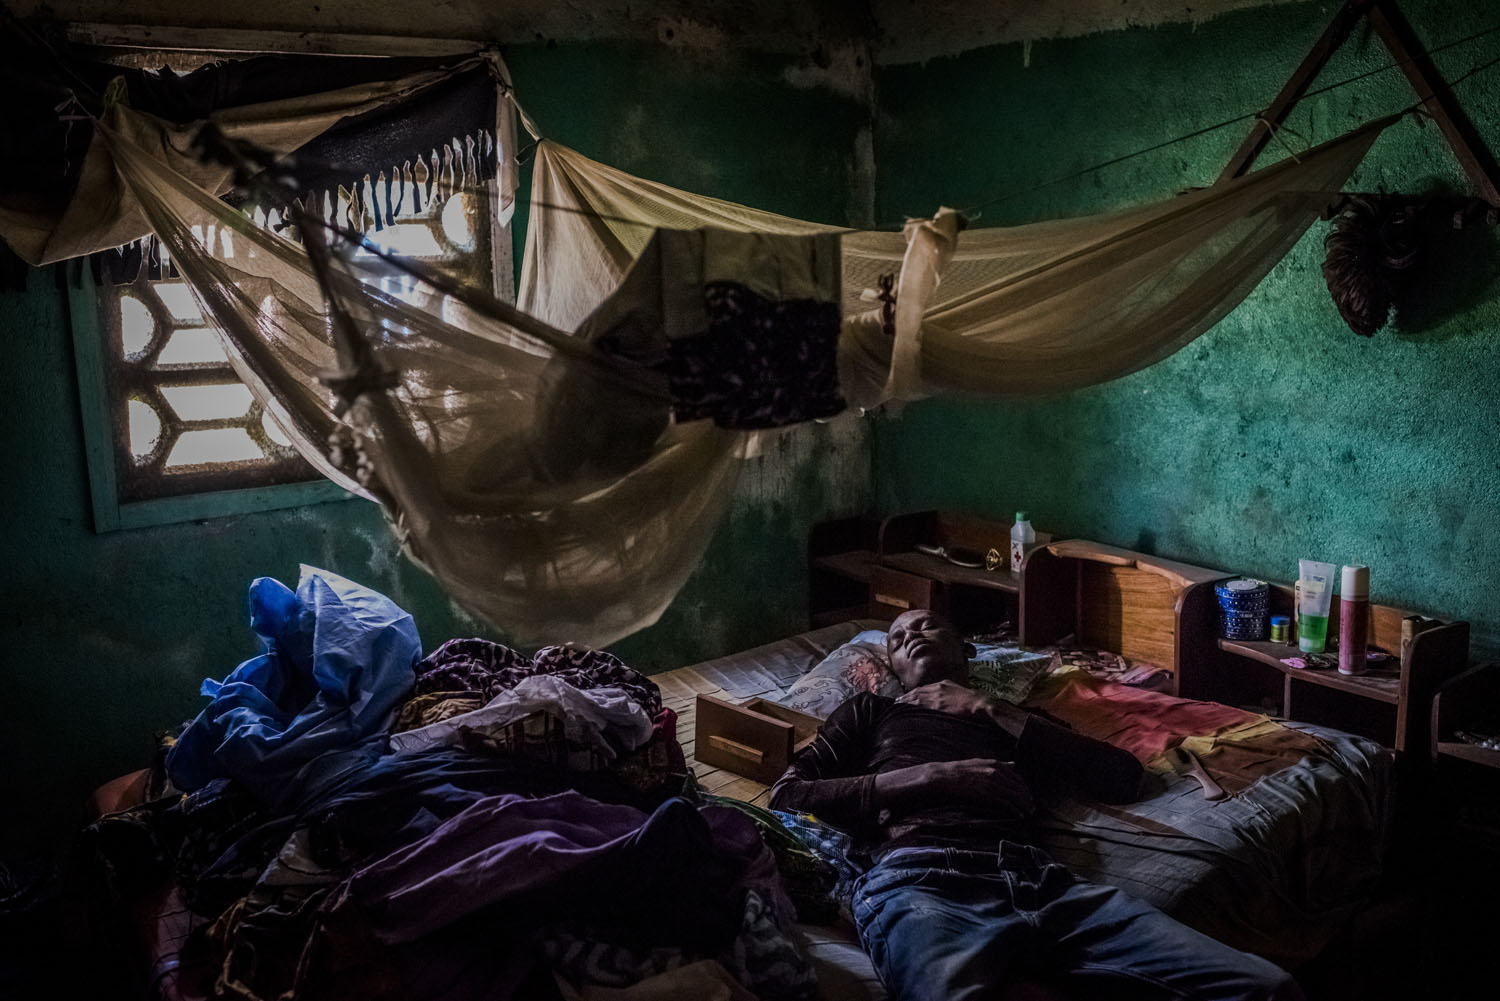 Mark Jerry, who along with his adopted daughter was turned away from an Ebola clinic a day prior, rests at his grandmother?s home in Monrovia, Liberia.